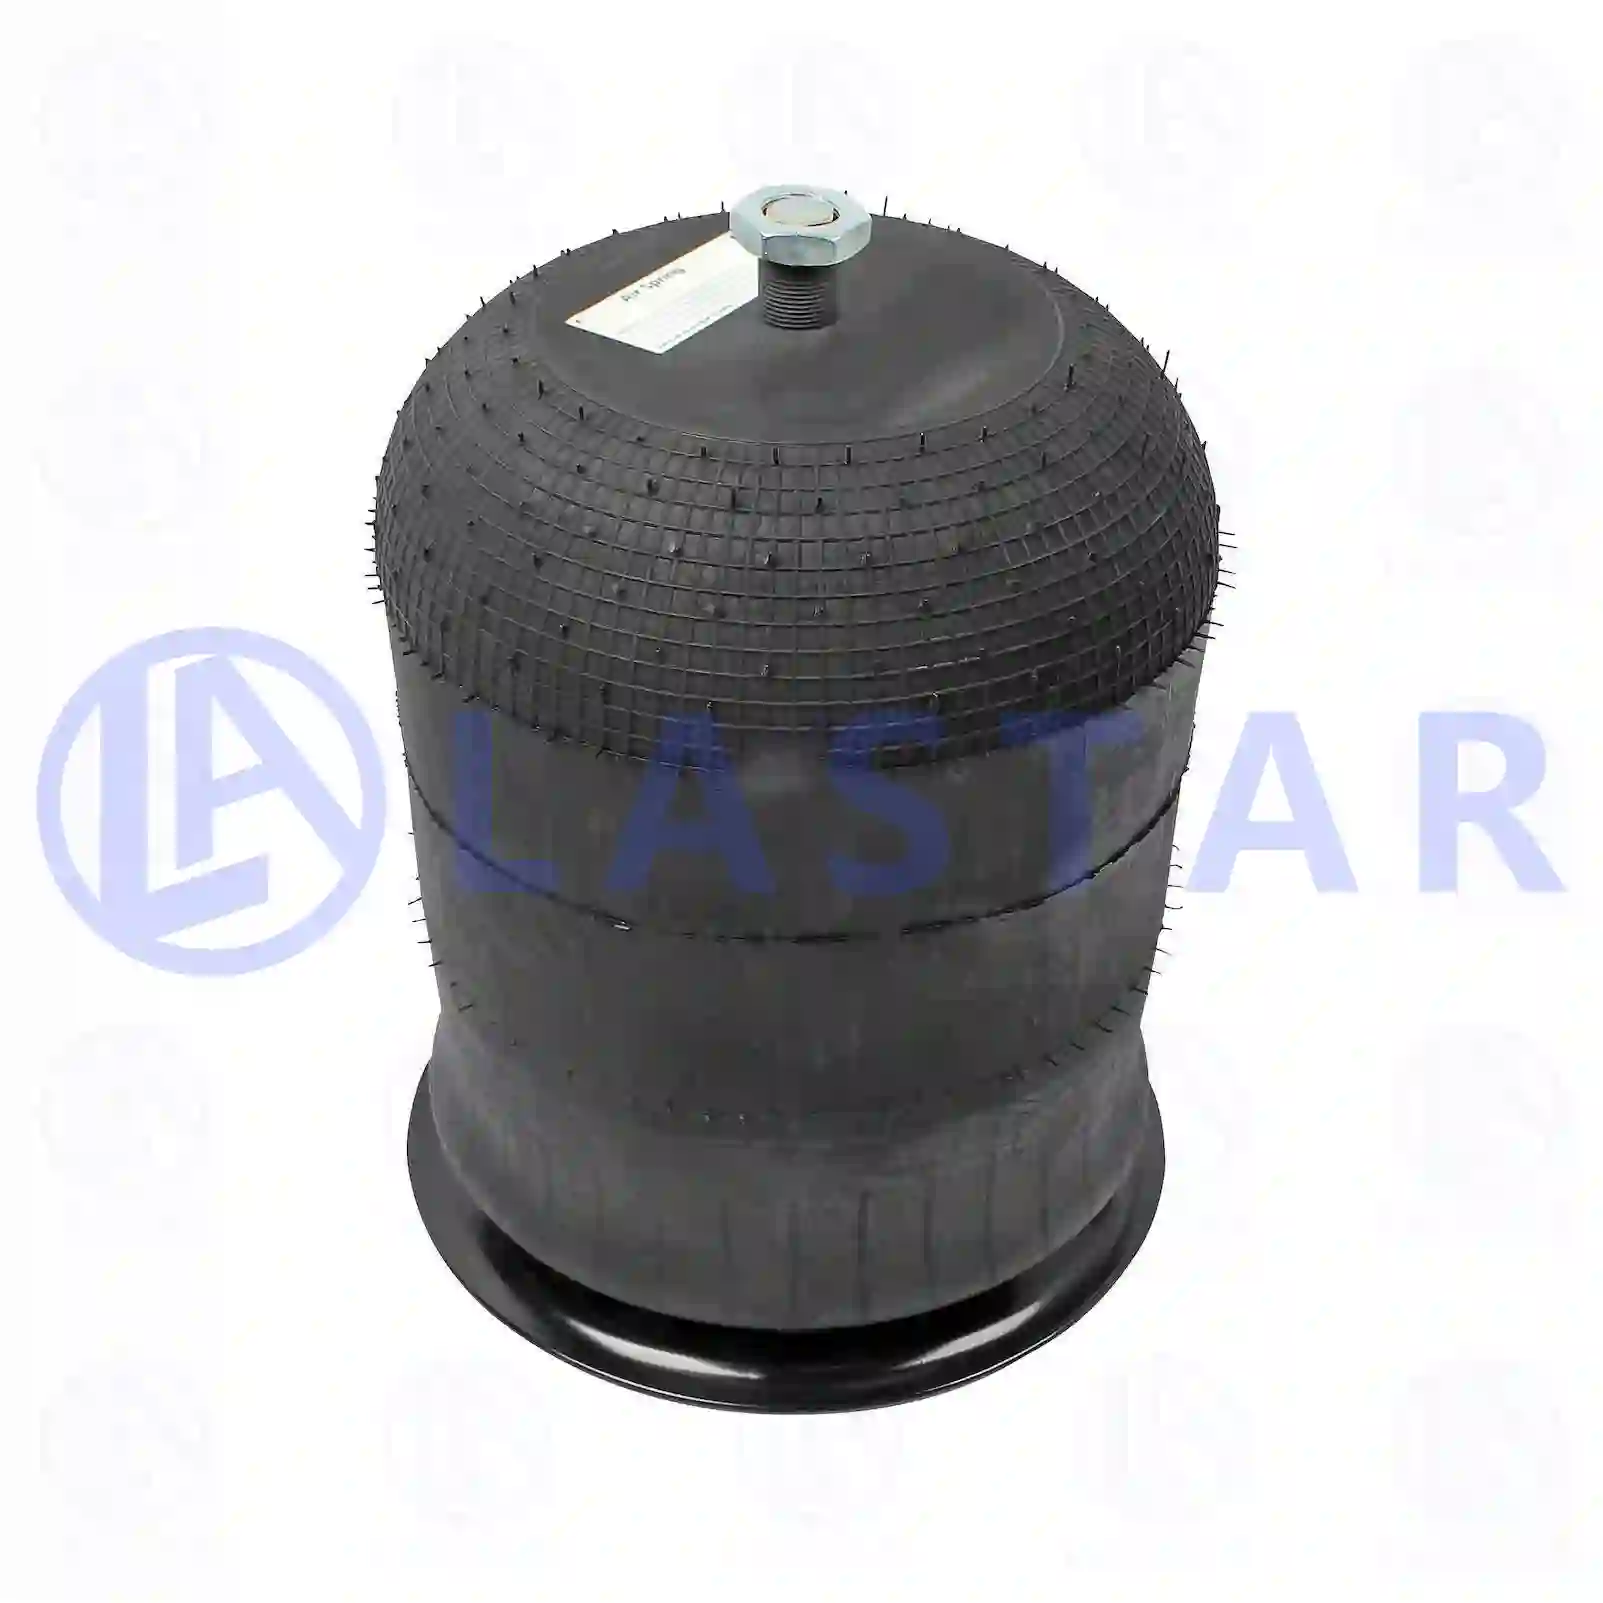 Air spring, with steel piston, 77727169, 9423204821, 9453200017, 9723204821, , , , ||  77727169 Lastar Spare Part | Truck Spare Parts, Auotomotive Spare Parts Air spring, with steel piston, 77727169, 9423204821, 9453200017, 9723204821, , , , ||  77727169 Lastar Spare Part | Truck Spare Parts, Auotomotive Spare Parts